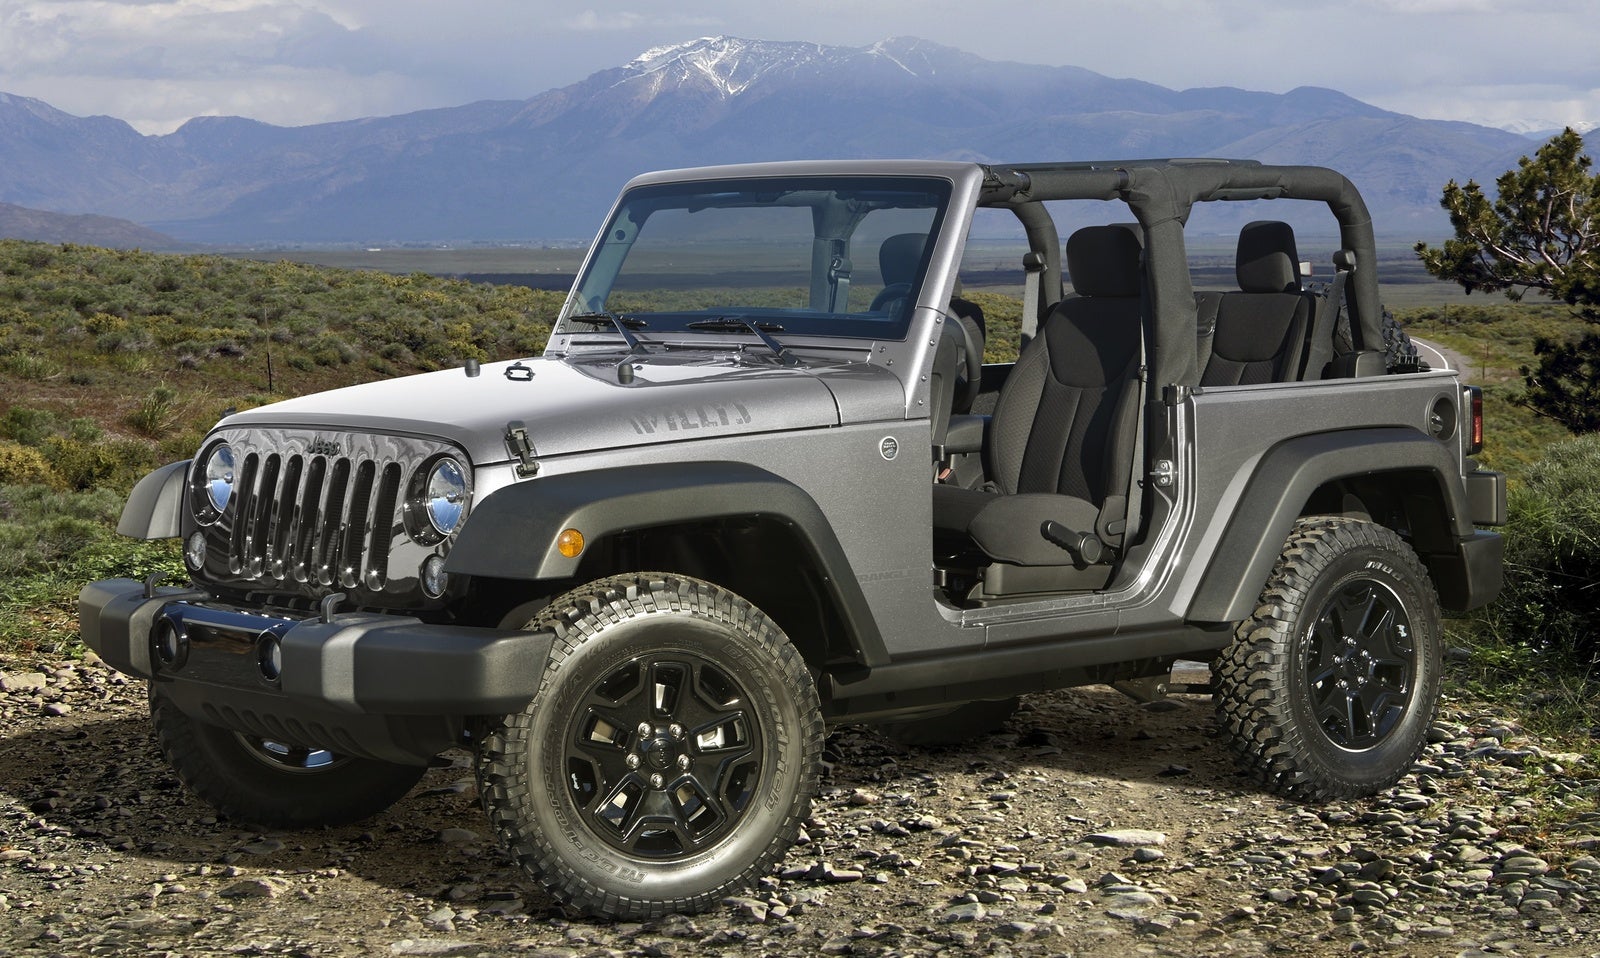 Used jeep wranglers cheap #2